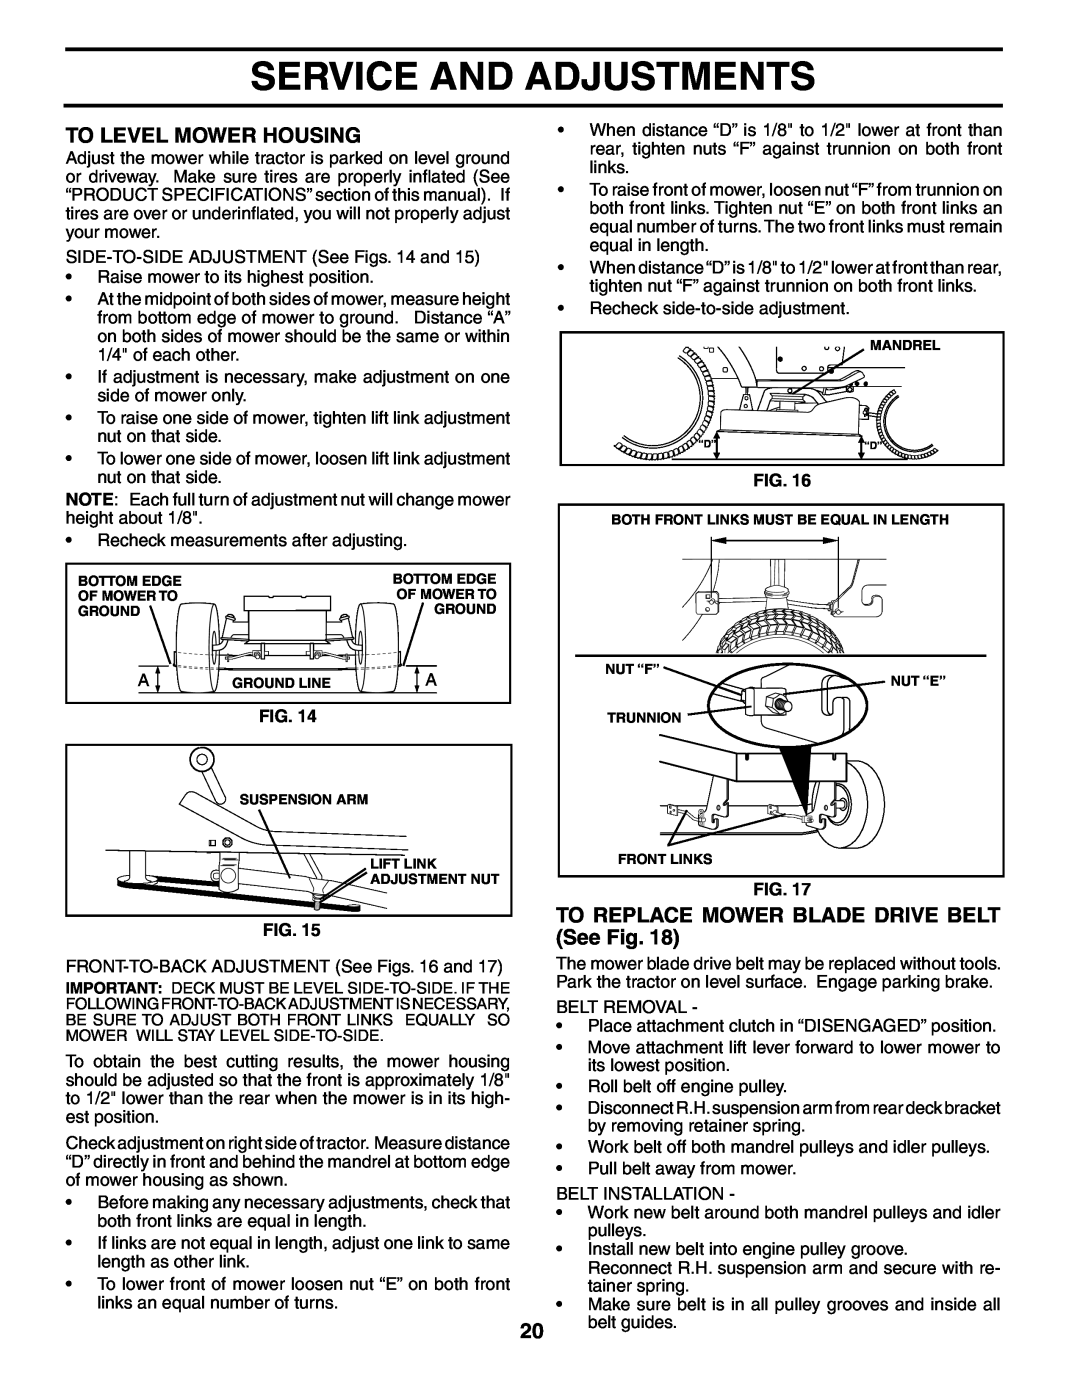 Poulan HD13538 manual To Level Mower Housing, TO REPLACE MOWER BLADE DRIVE BELT See Fig, Service And Adjustments 